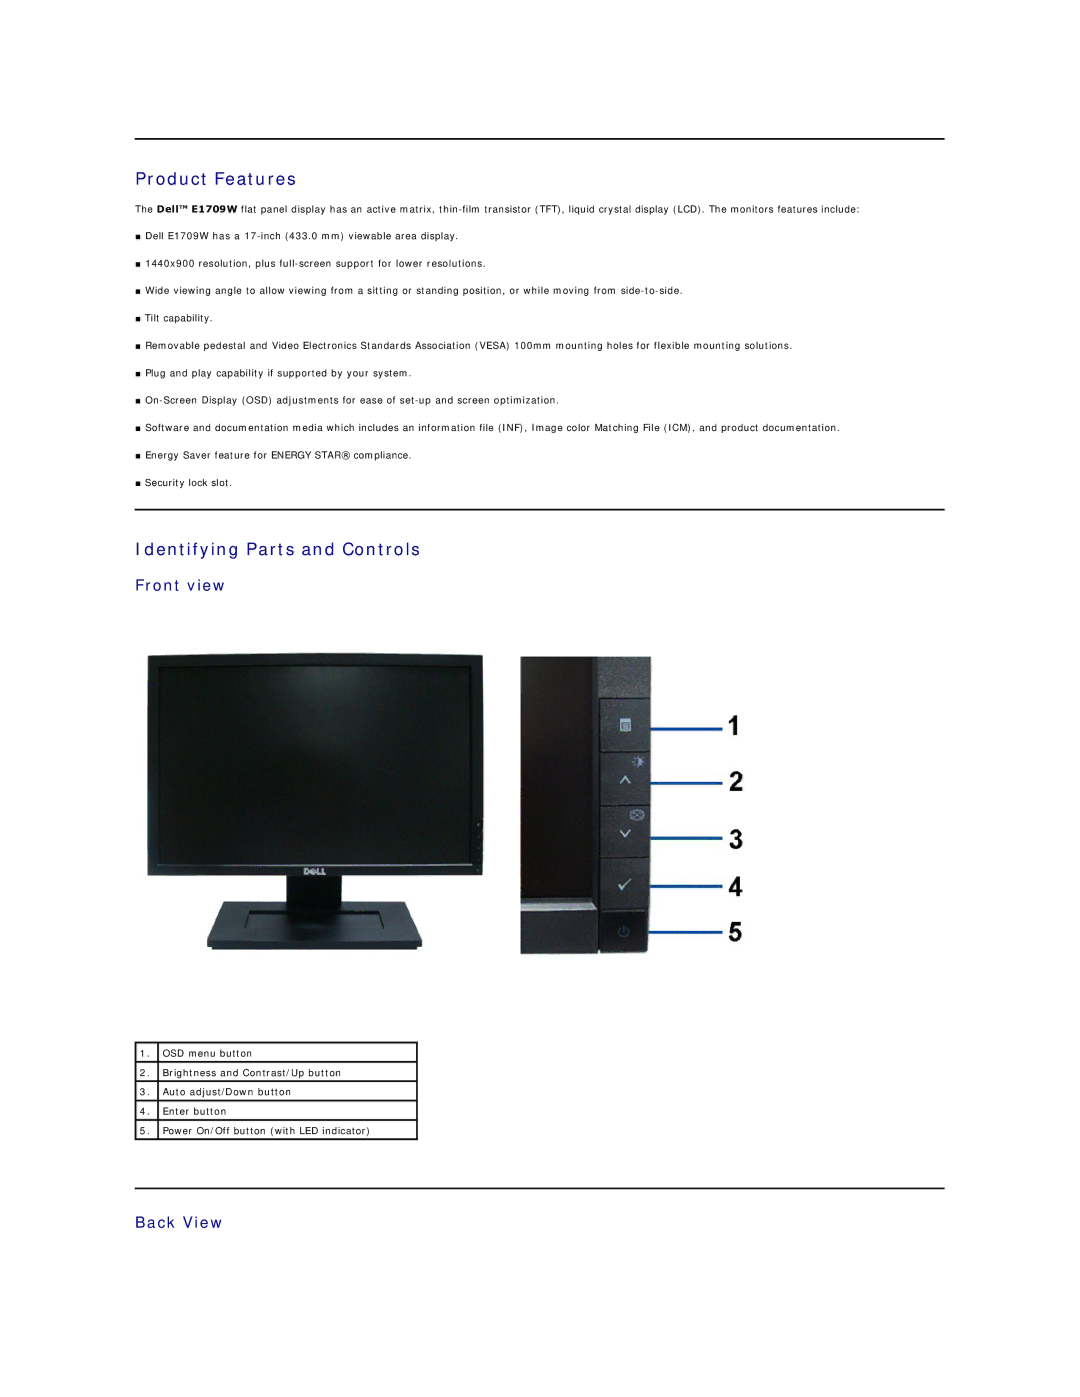 Dell E1709WC appendix Product Features, Identifying Parts and Controls, Front view, Back View 